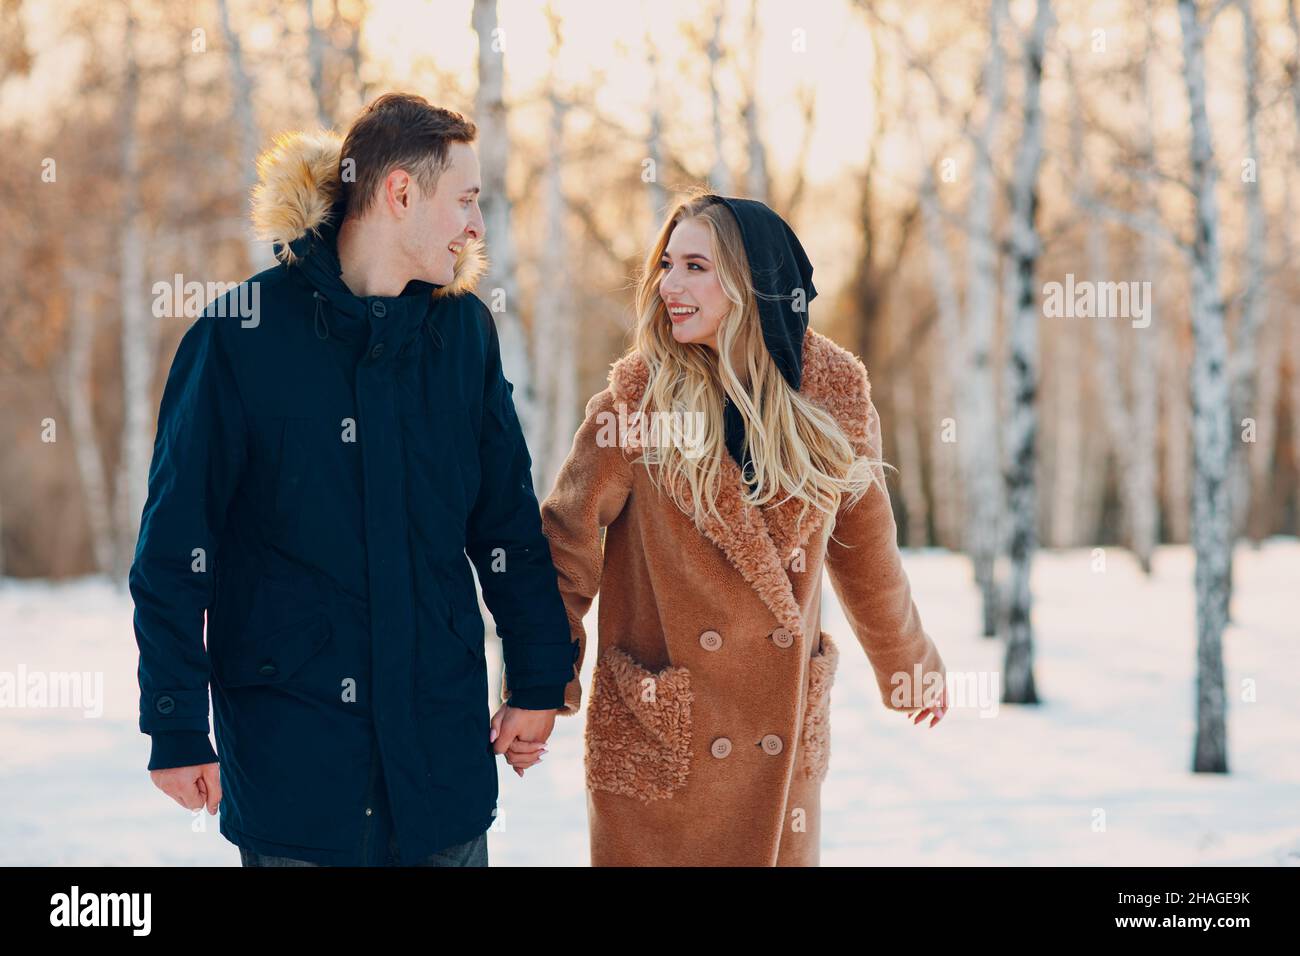 Loving young couple walking playing and having fun in winter forest park. Stock Photo